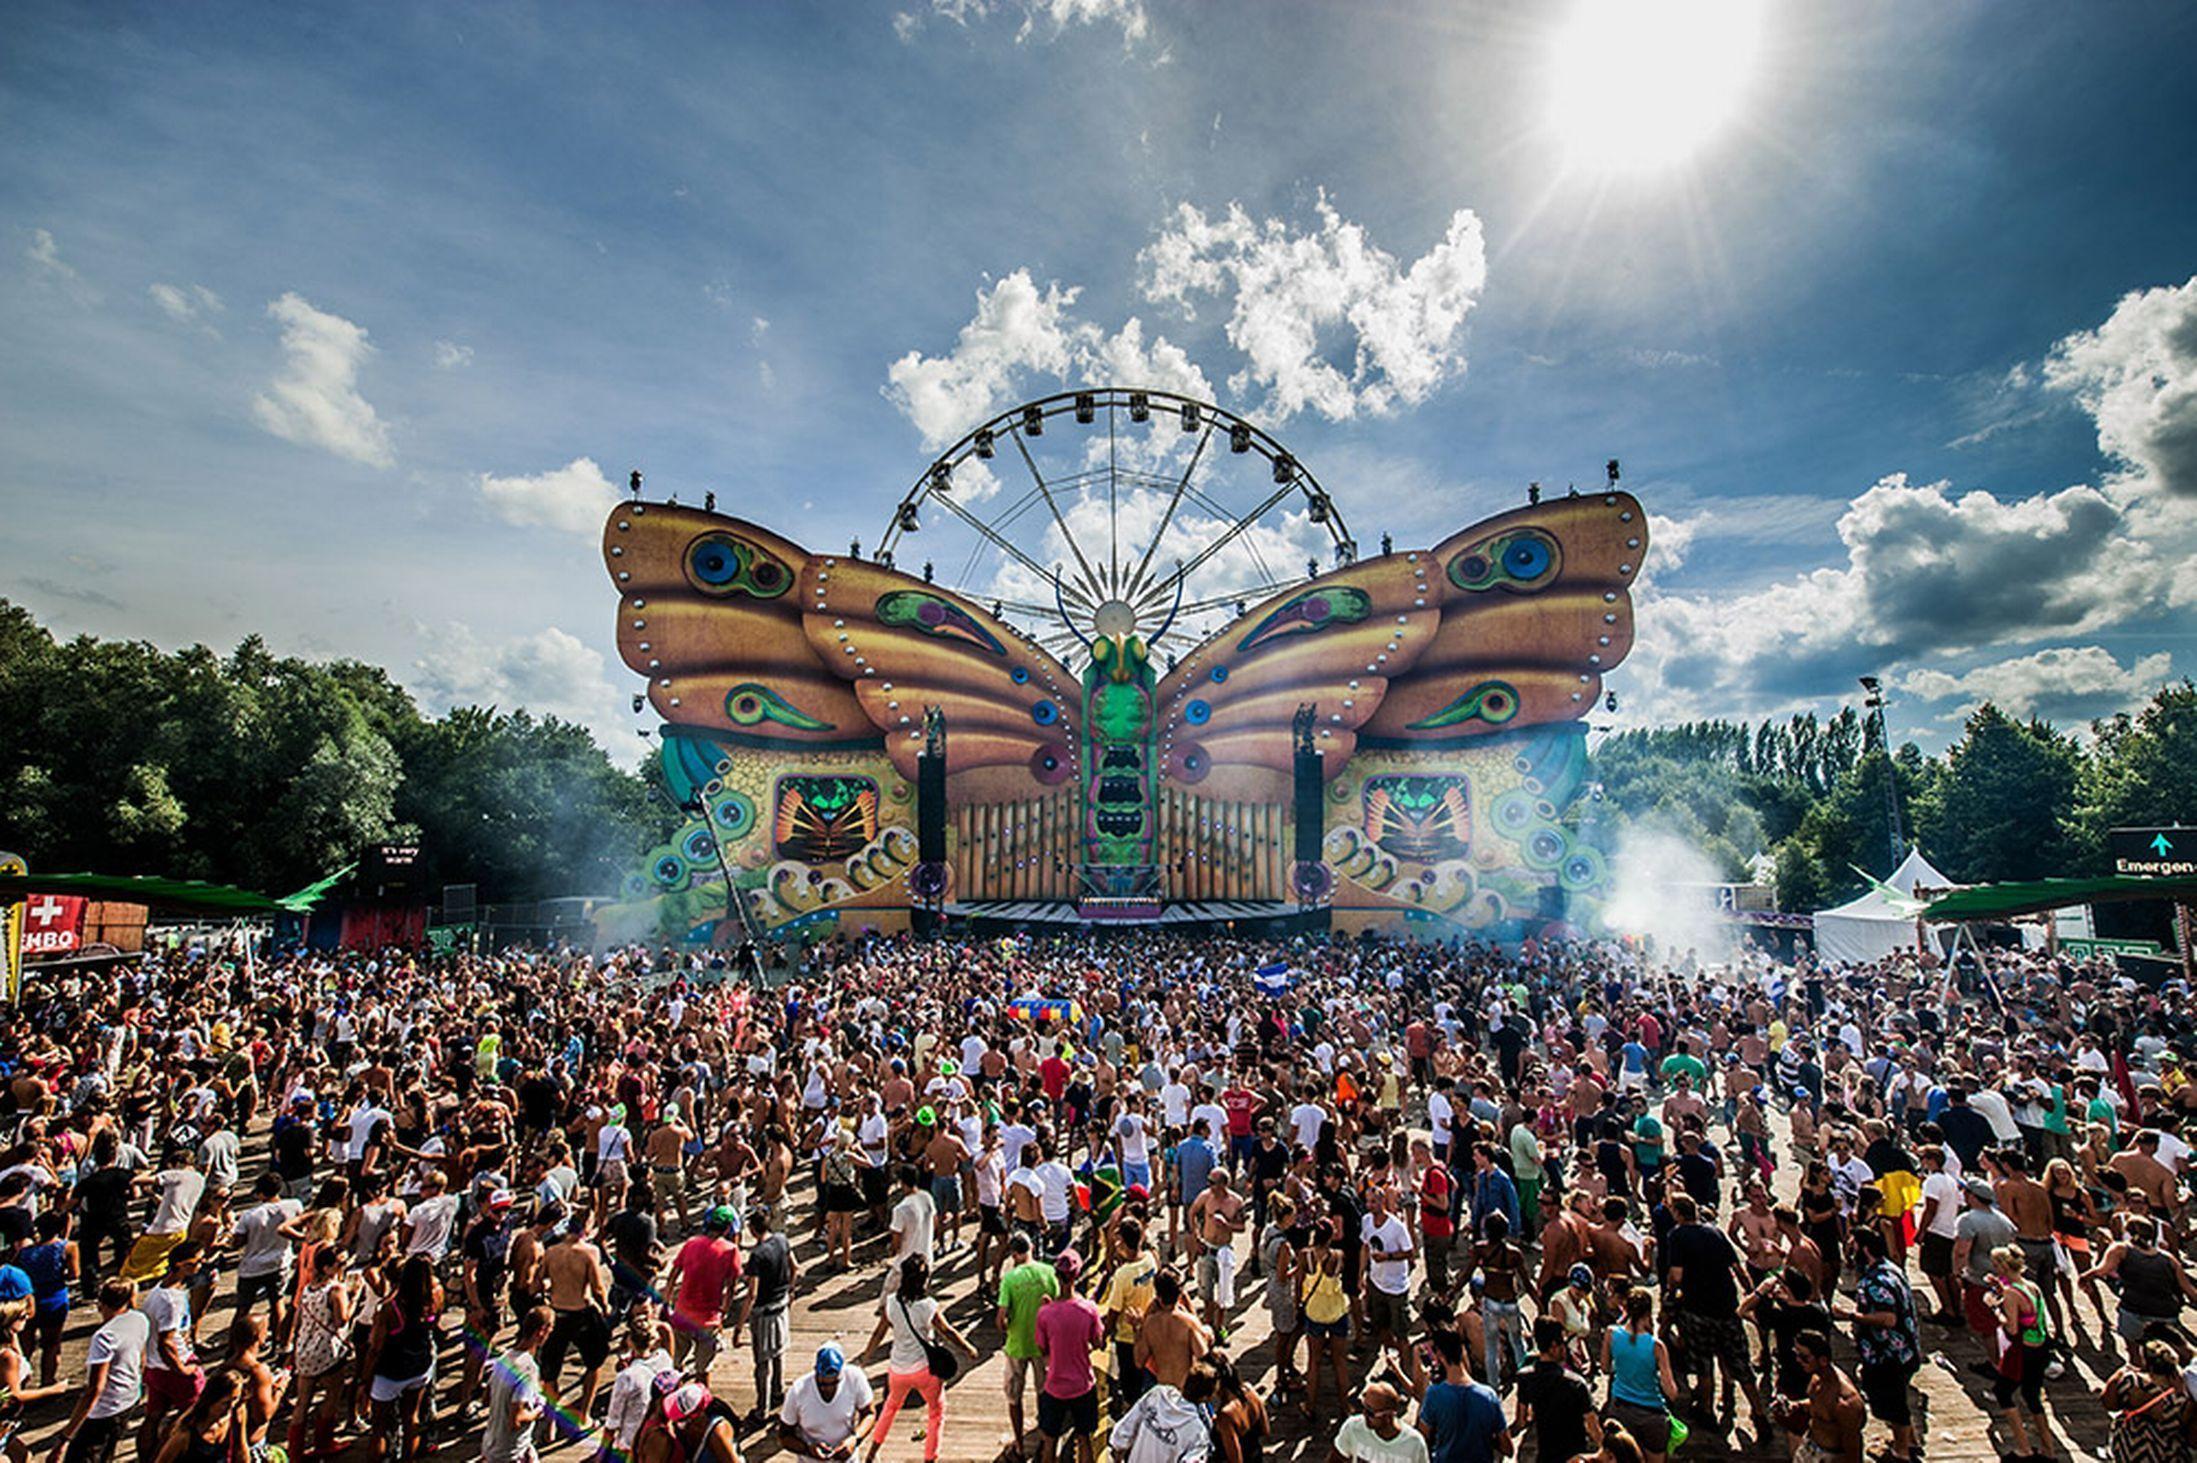 Dreamville The Gathering. #Tomorrowland. Events